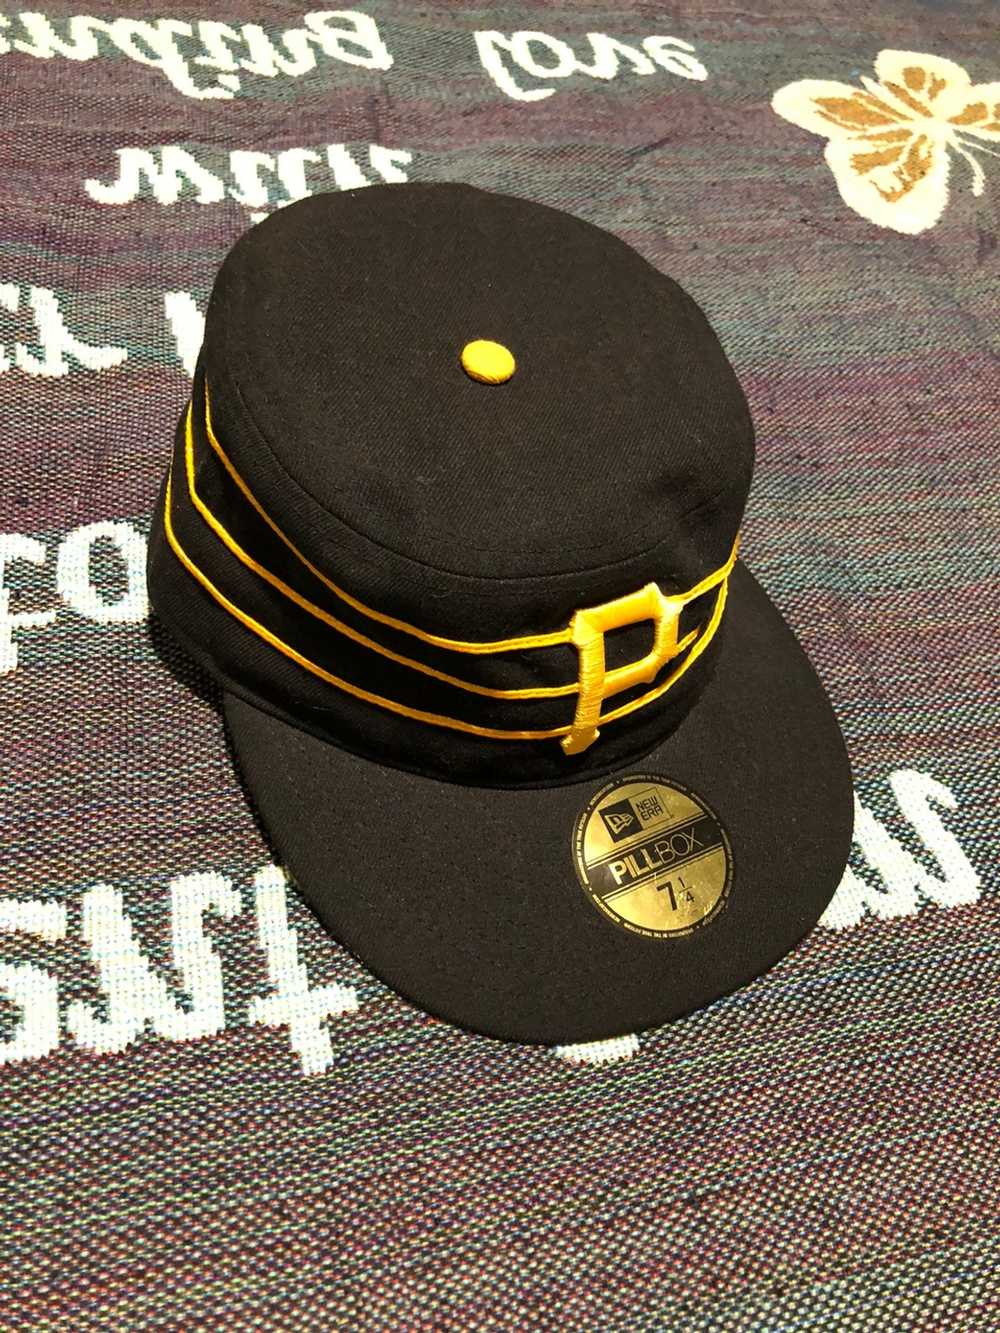 Pittsburgh Pirates 1970-75 COOPERSTOWN REPLICA SNAPBACK Hat